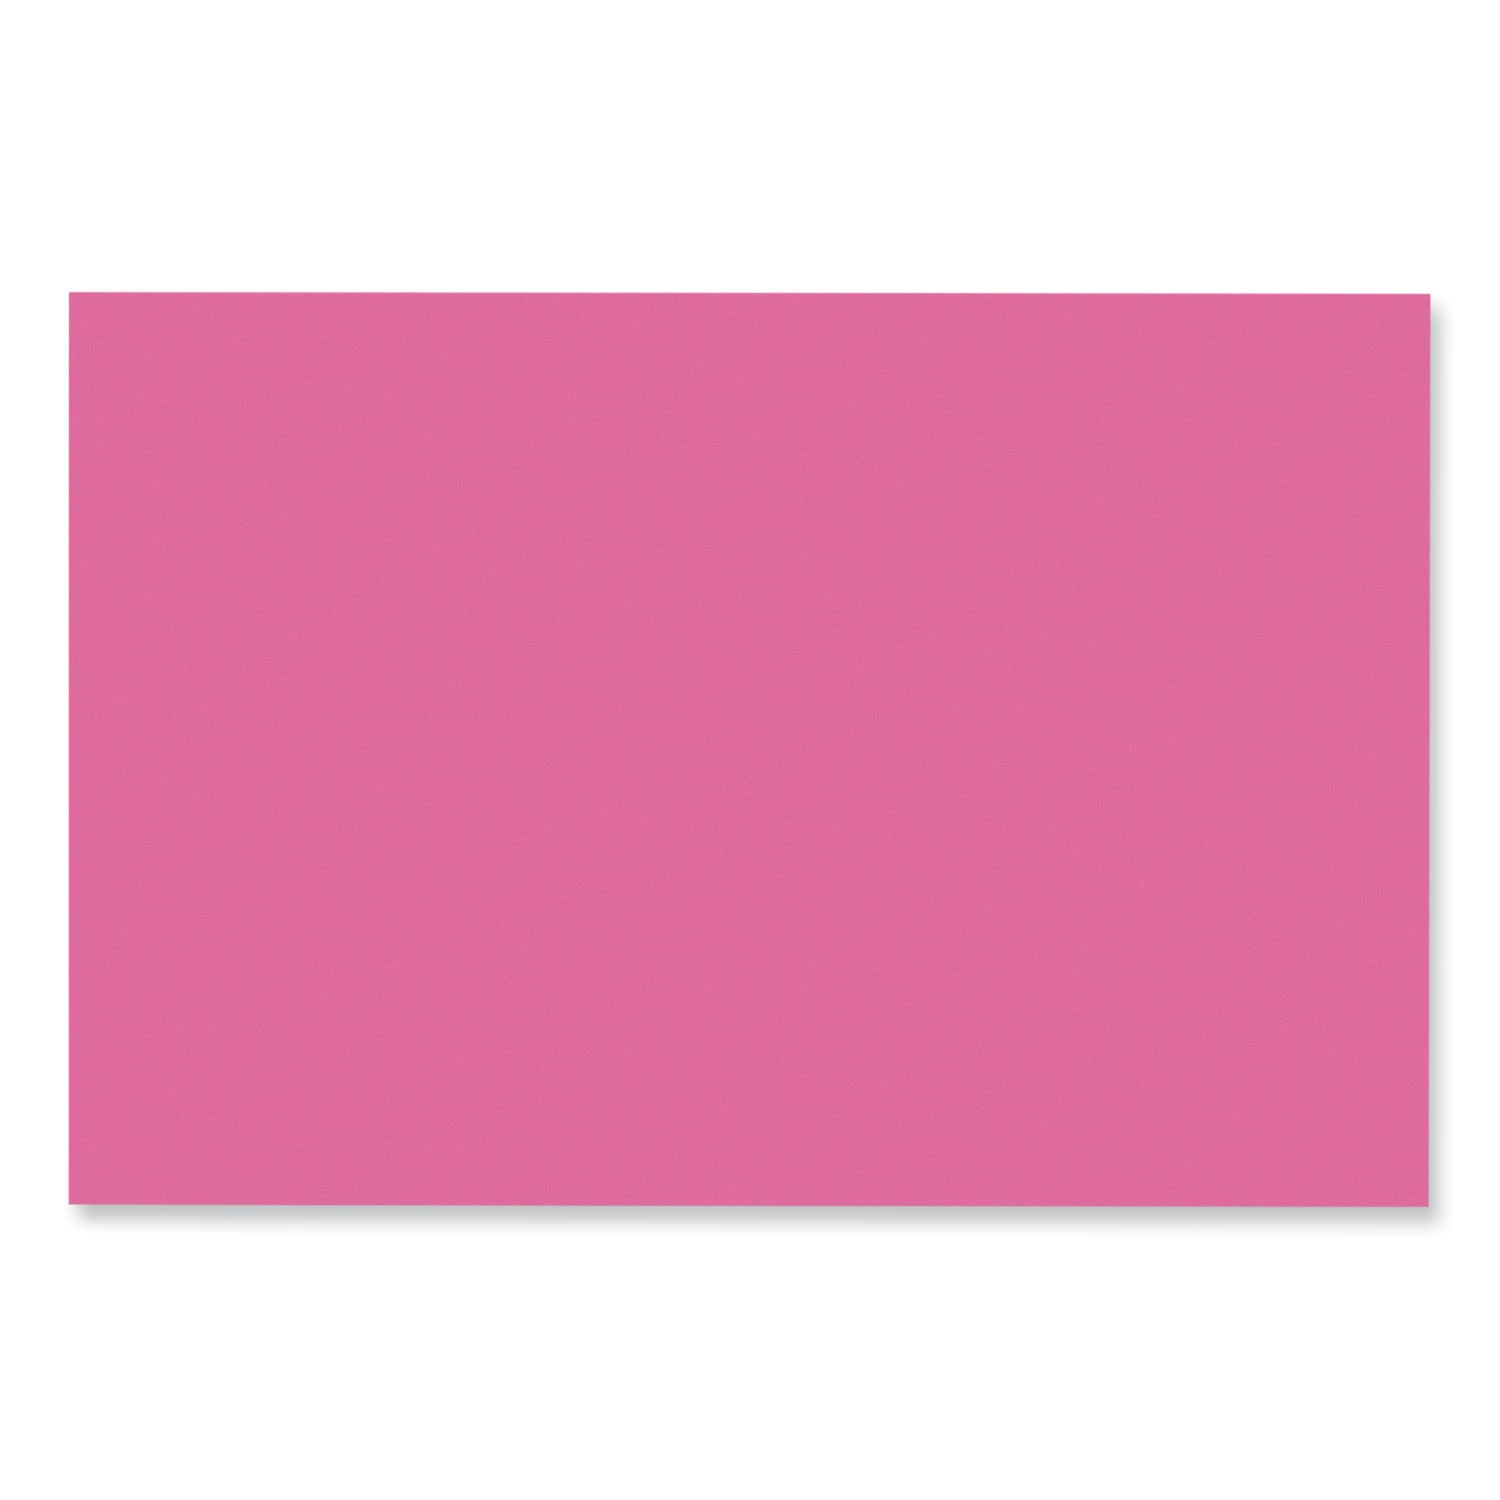 SunWorks Construction Paper, 50 lb Text Weight, 12 x 18, Hot Pink, 50/Pack - 